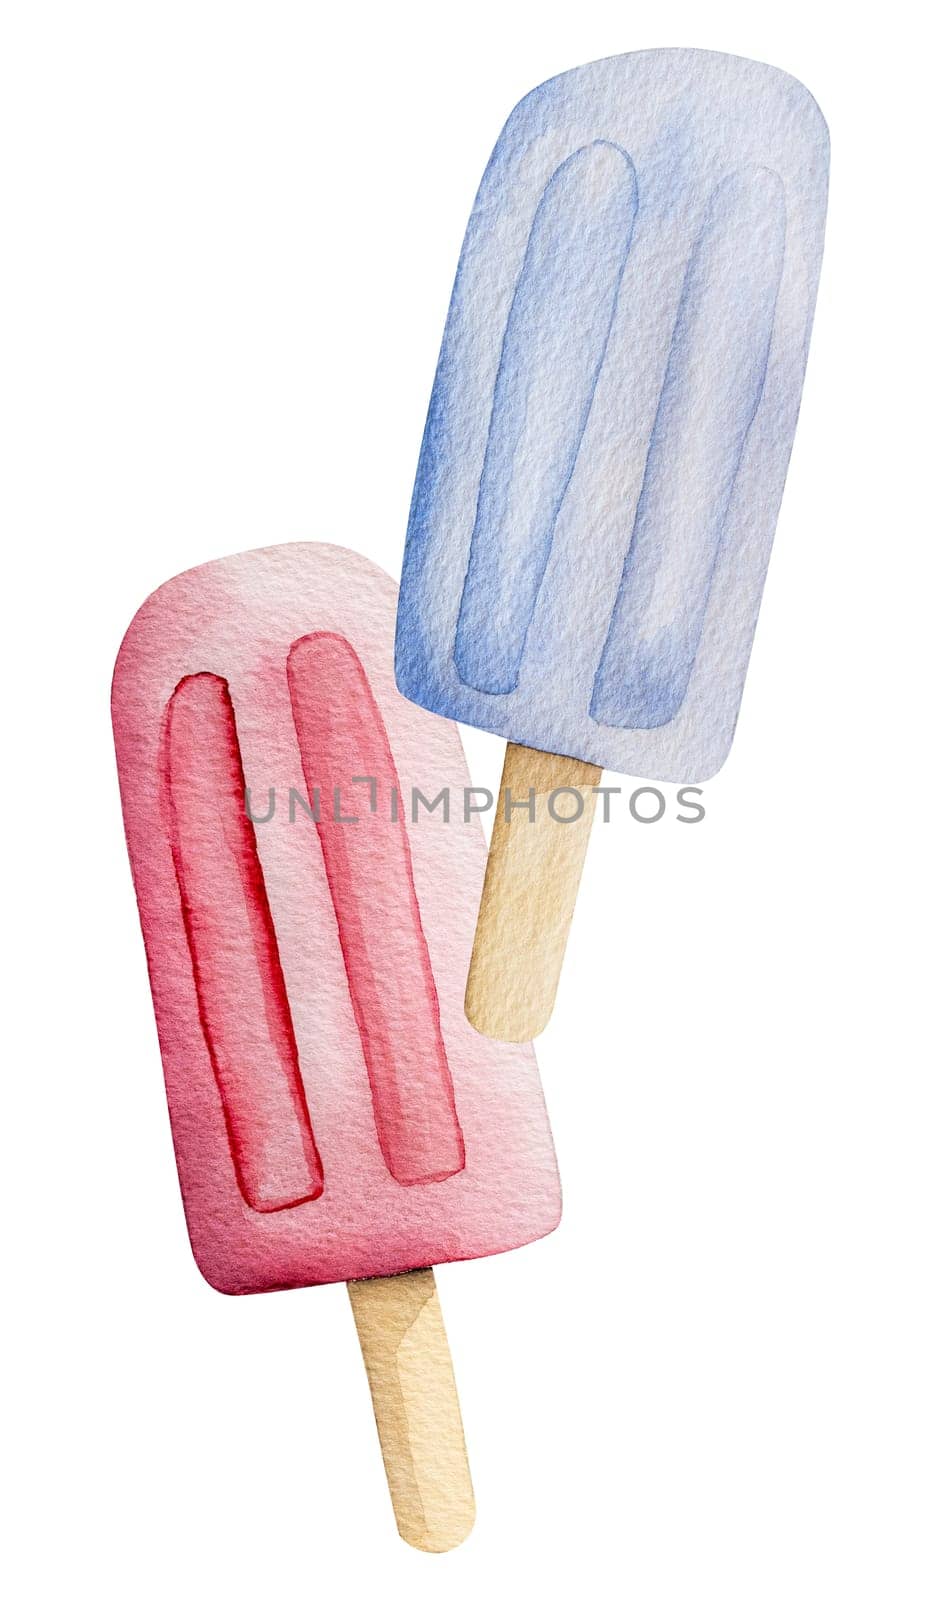 Hand-Drawn Illustration Of Blue And Pink Ice Cream With A Summer Theme by tan4ikk1